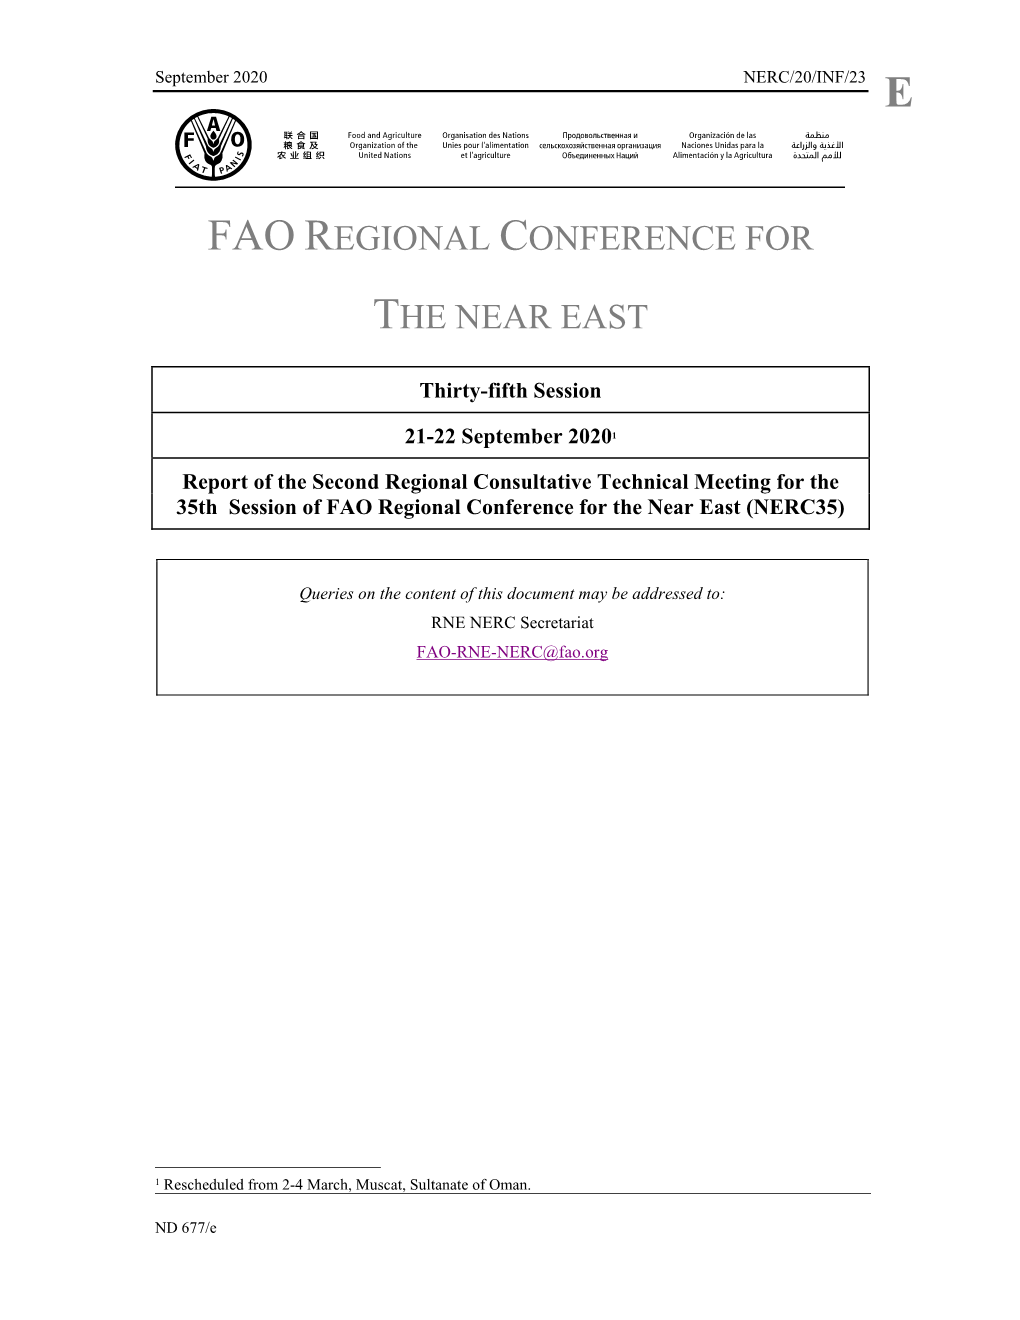 Report of the Second Regional Consultative Technical Meeting for the 35Th Session of FAO Regional Conference for the Near East (NERC35)